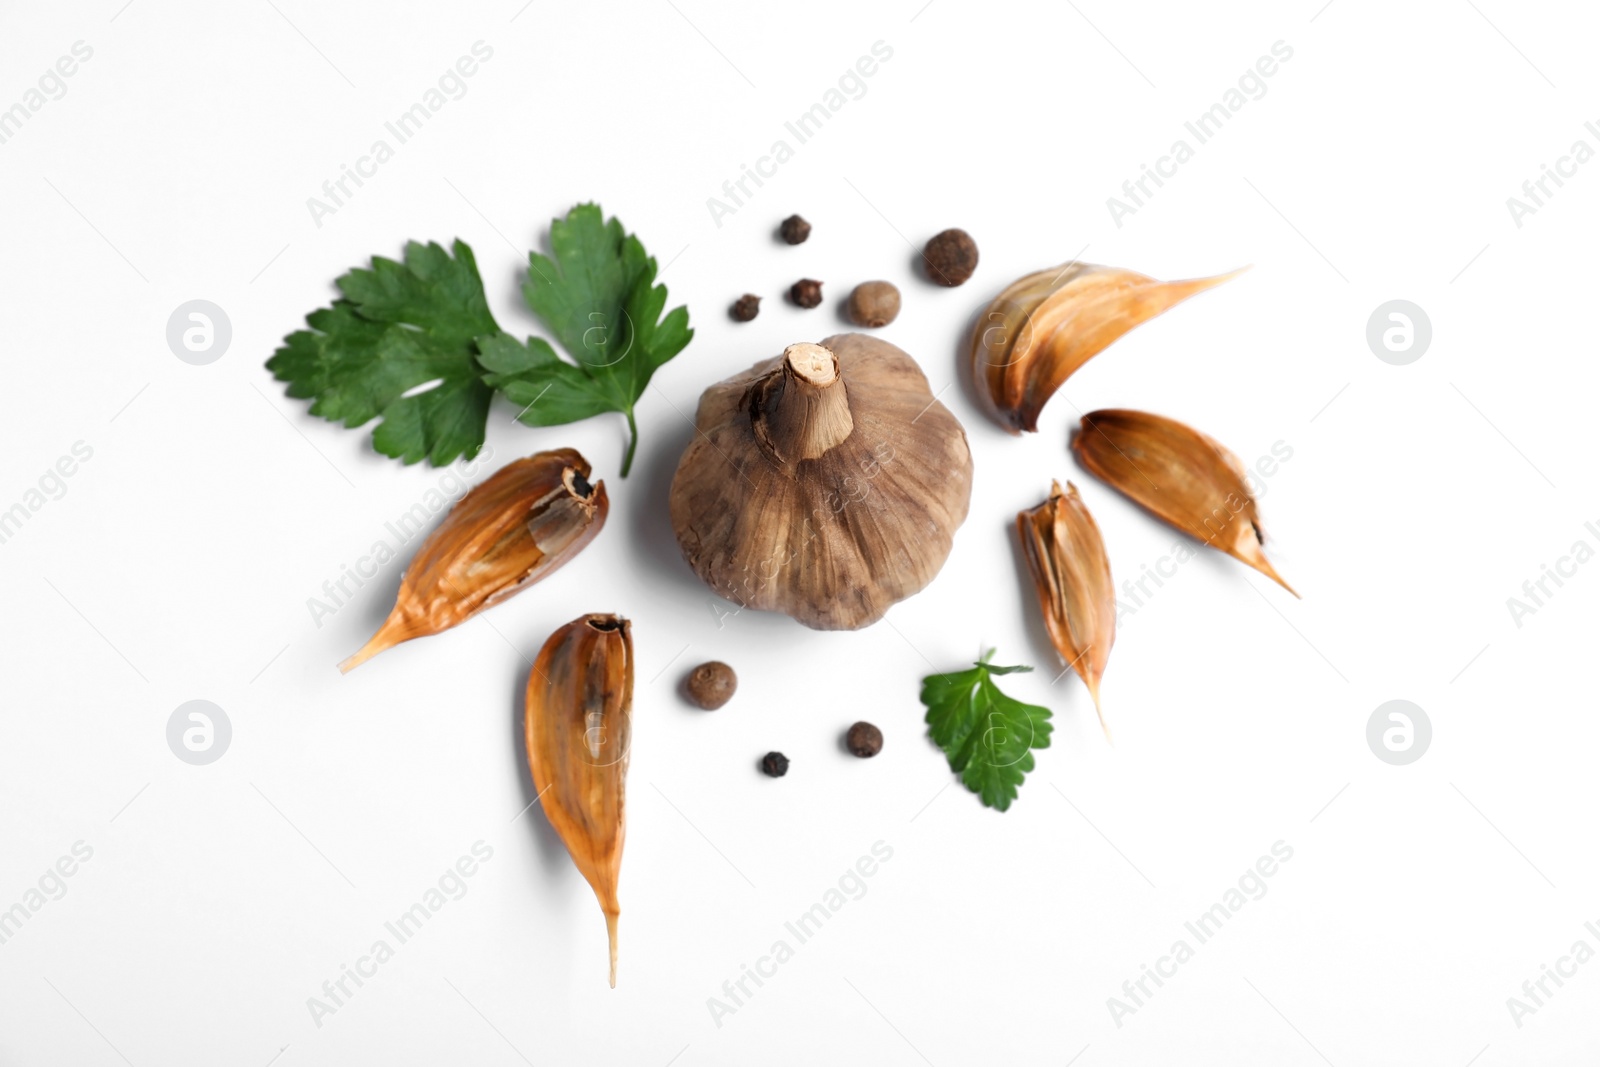 Photo of Aged black garlic with parsley and peppercorns on white background, view from above